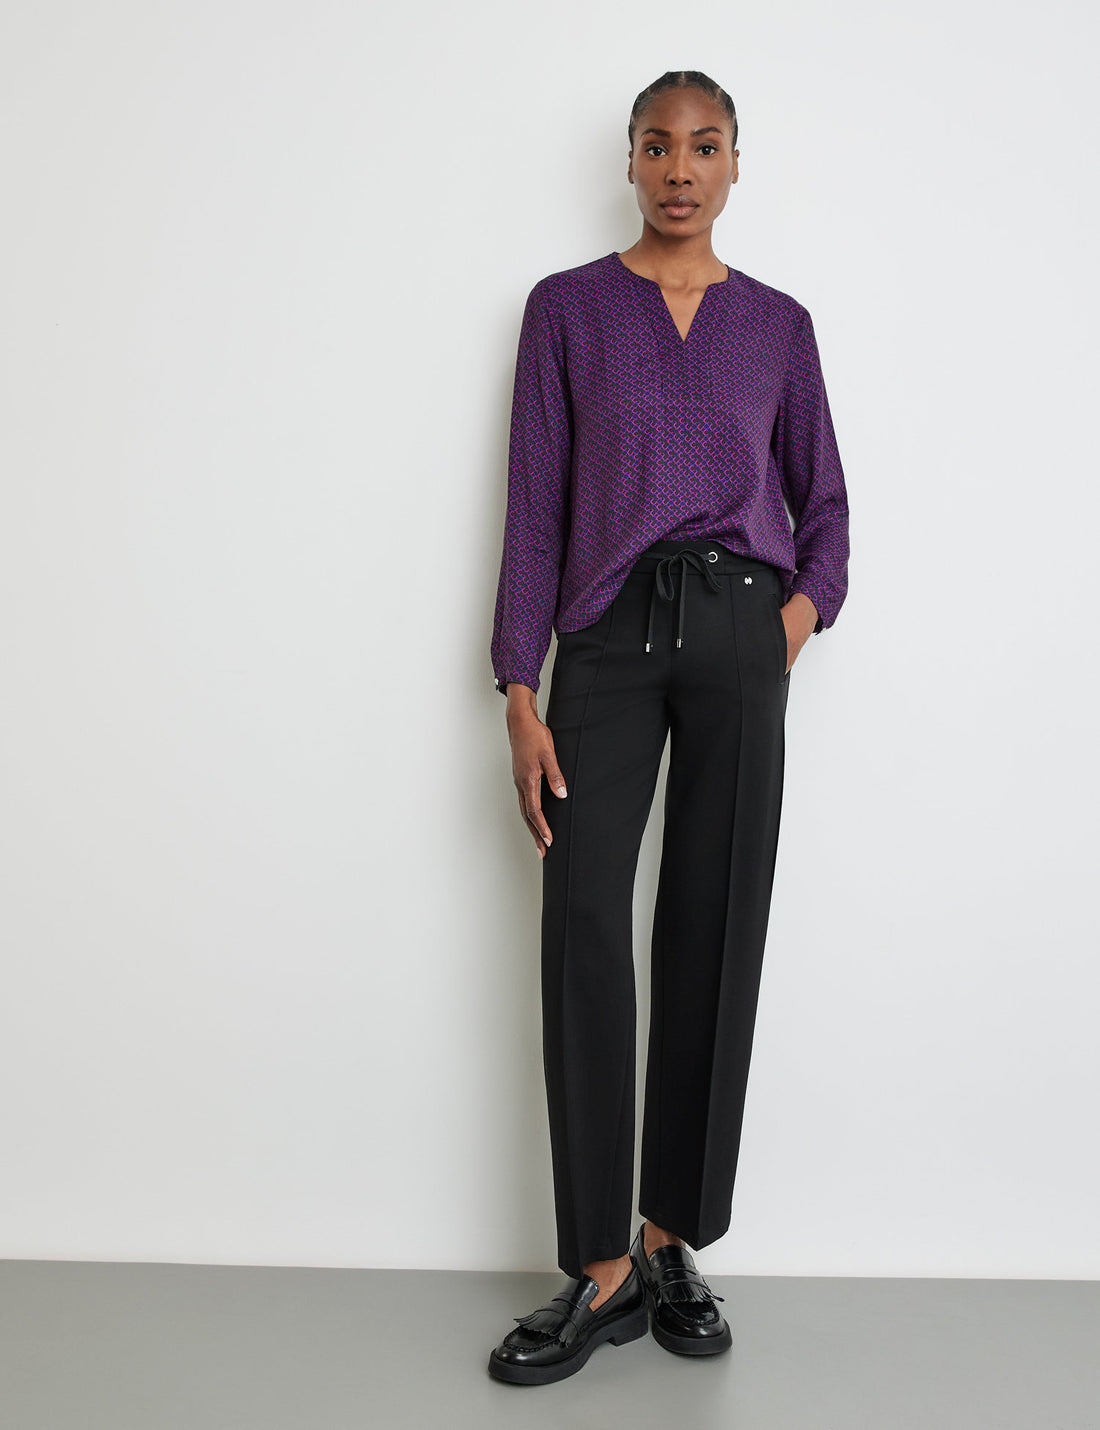 Fashionable Cloth Trousers With A Wide Leg, Vertical Pintucks And An Elasticated Waistband_122077-66211_11000_01